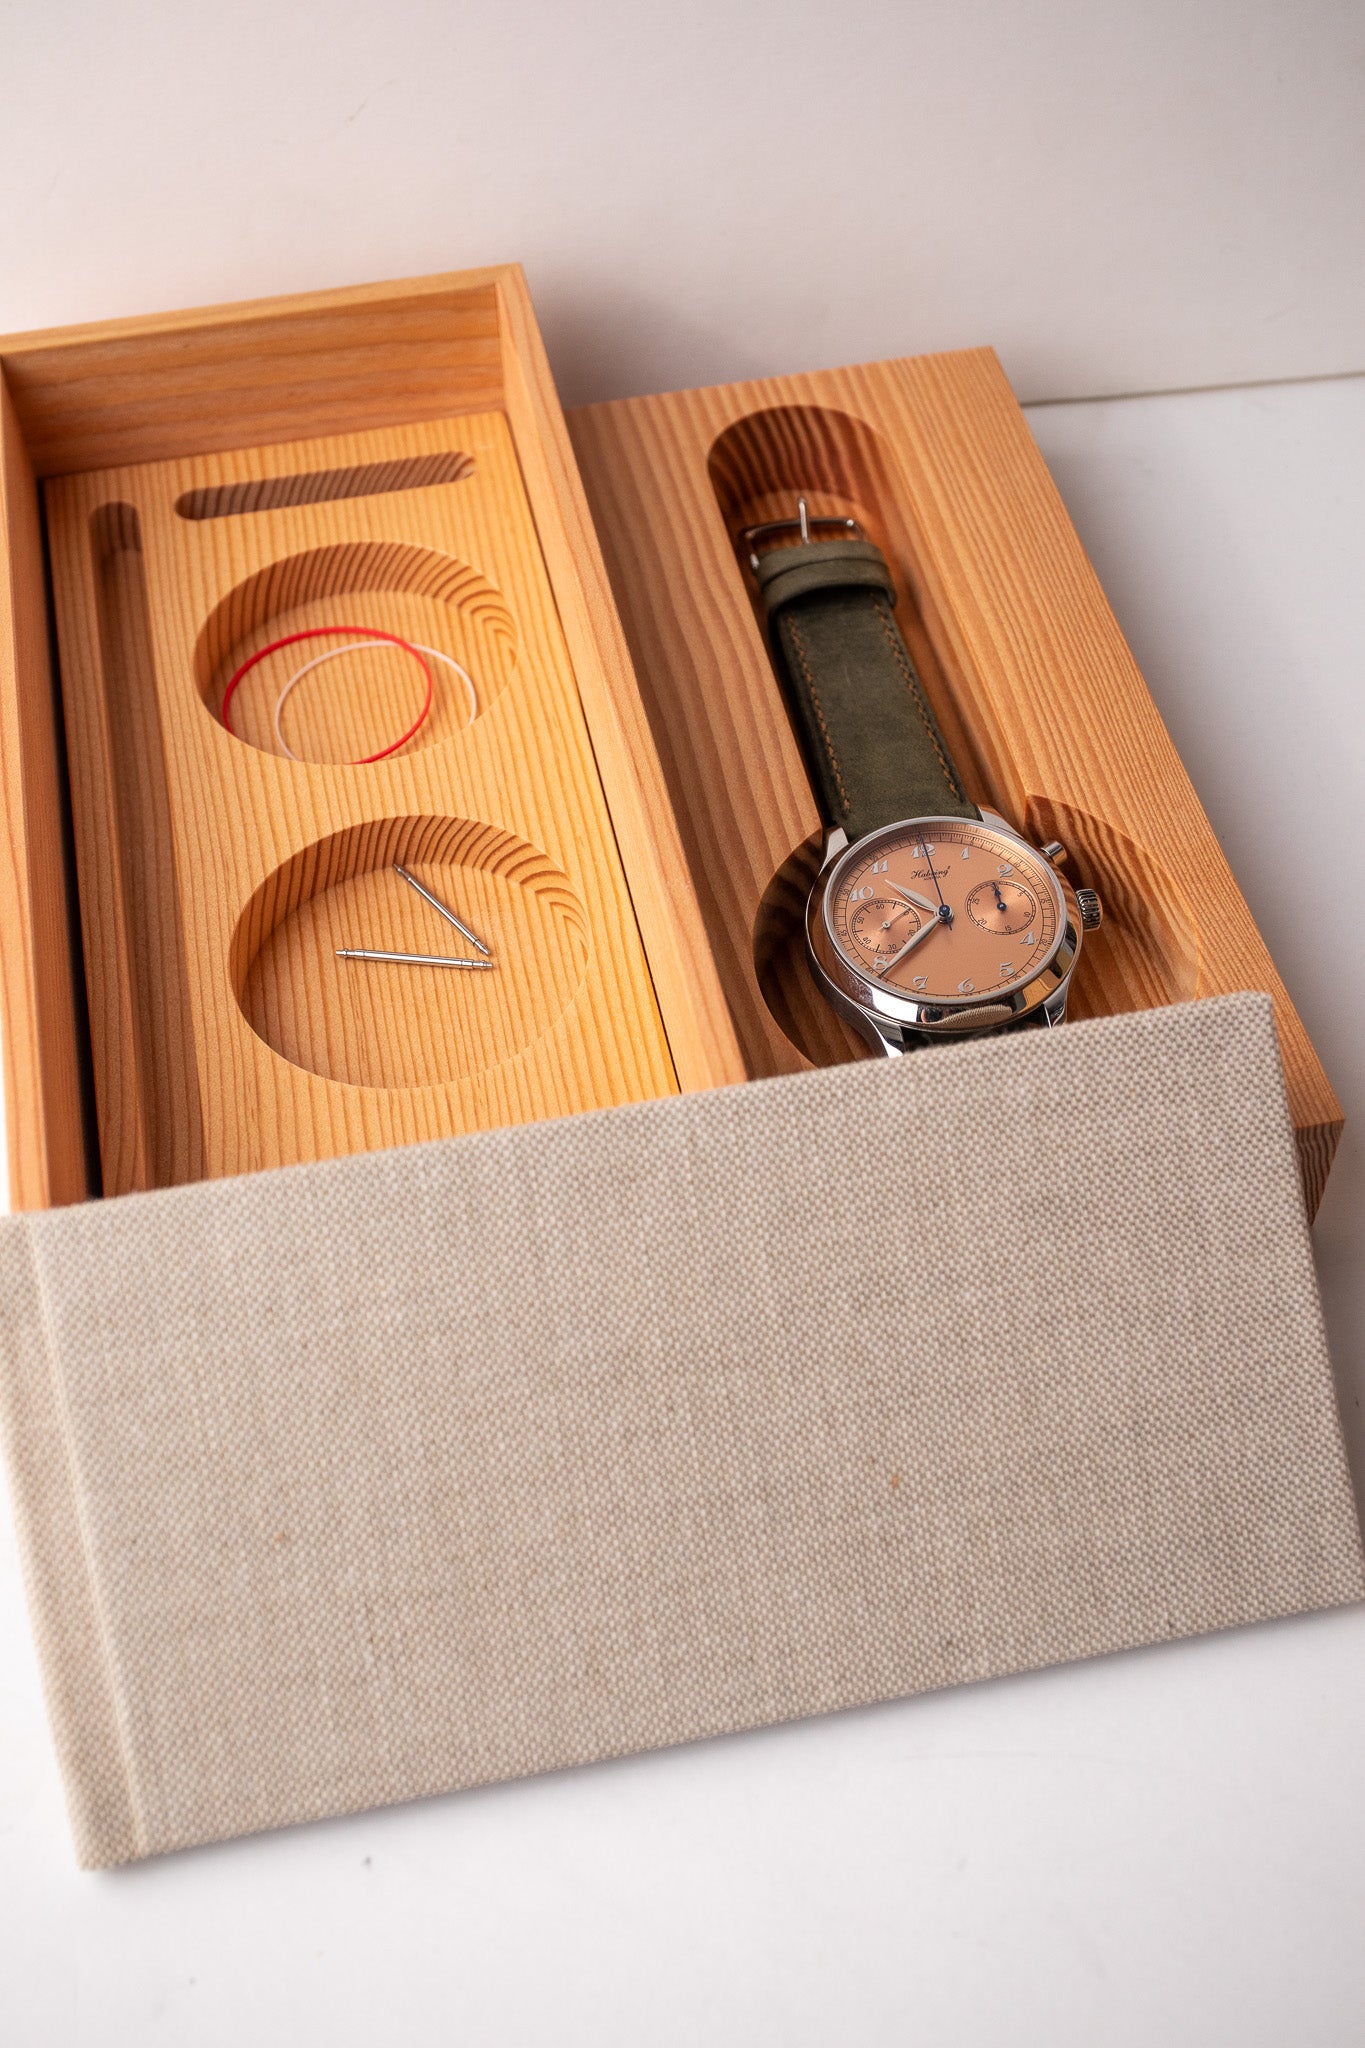 Habring Chrono-Felix stainless steel men's wooden watch box and extra parts